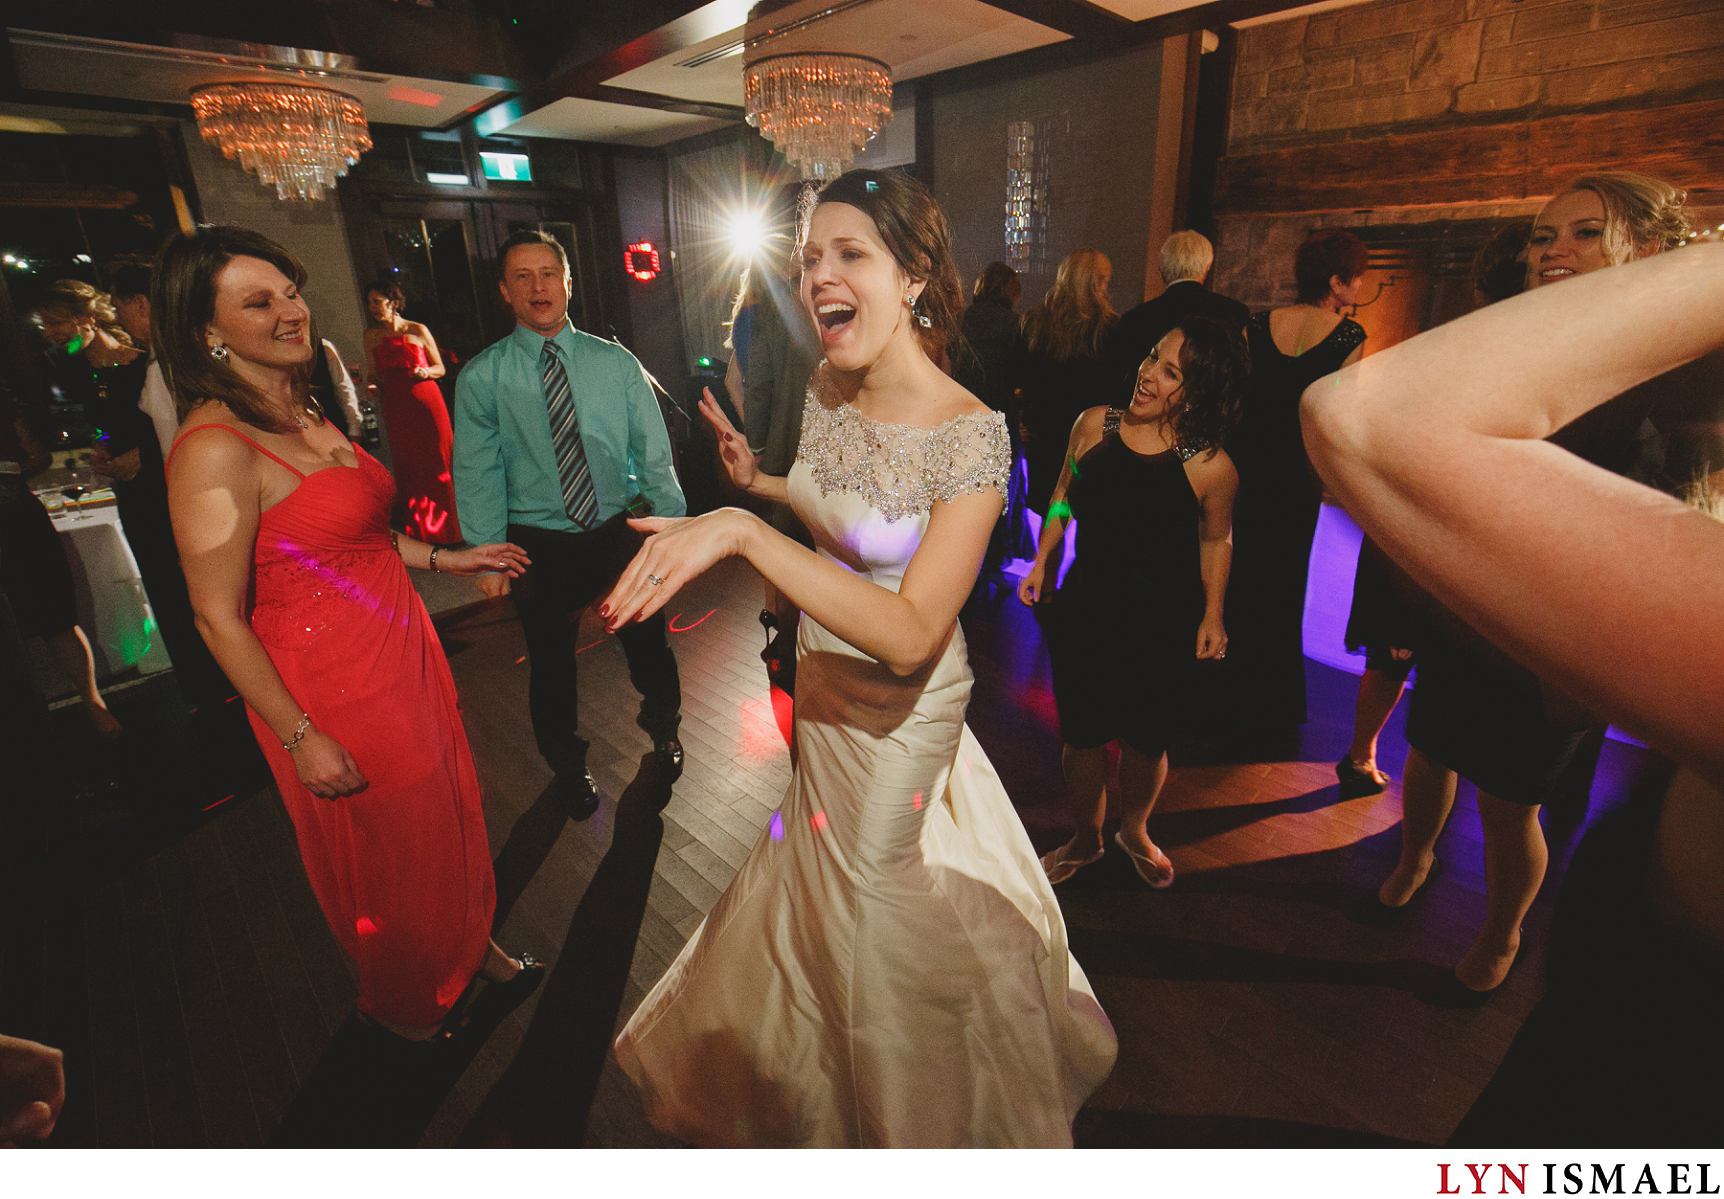 A very happy bride shows off her dance moves while her wedding guests encircle her at Whistle Bear Golf Club's Grandview Room dancefloor.